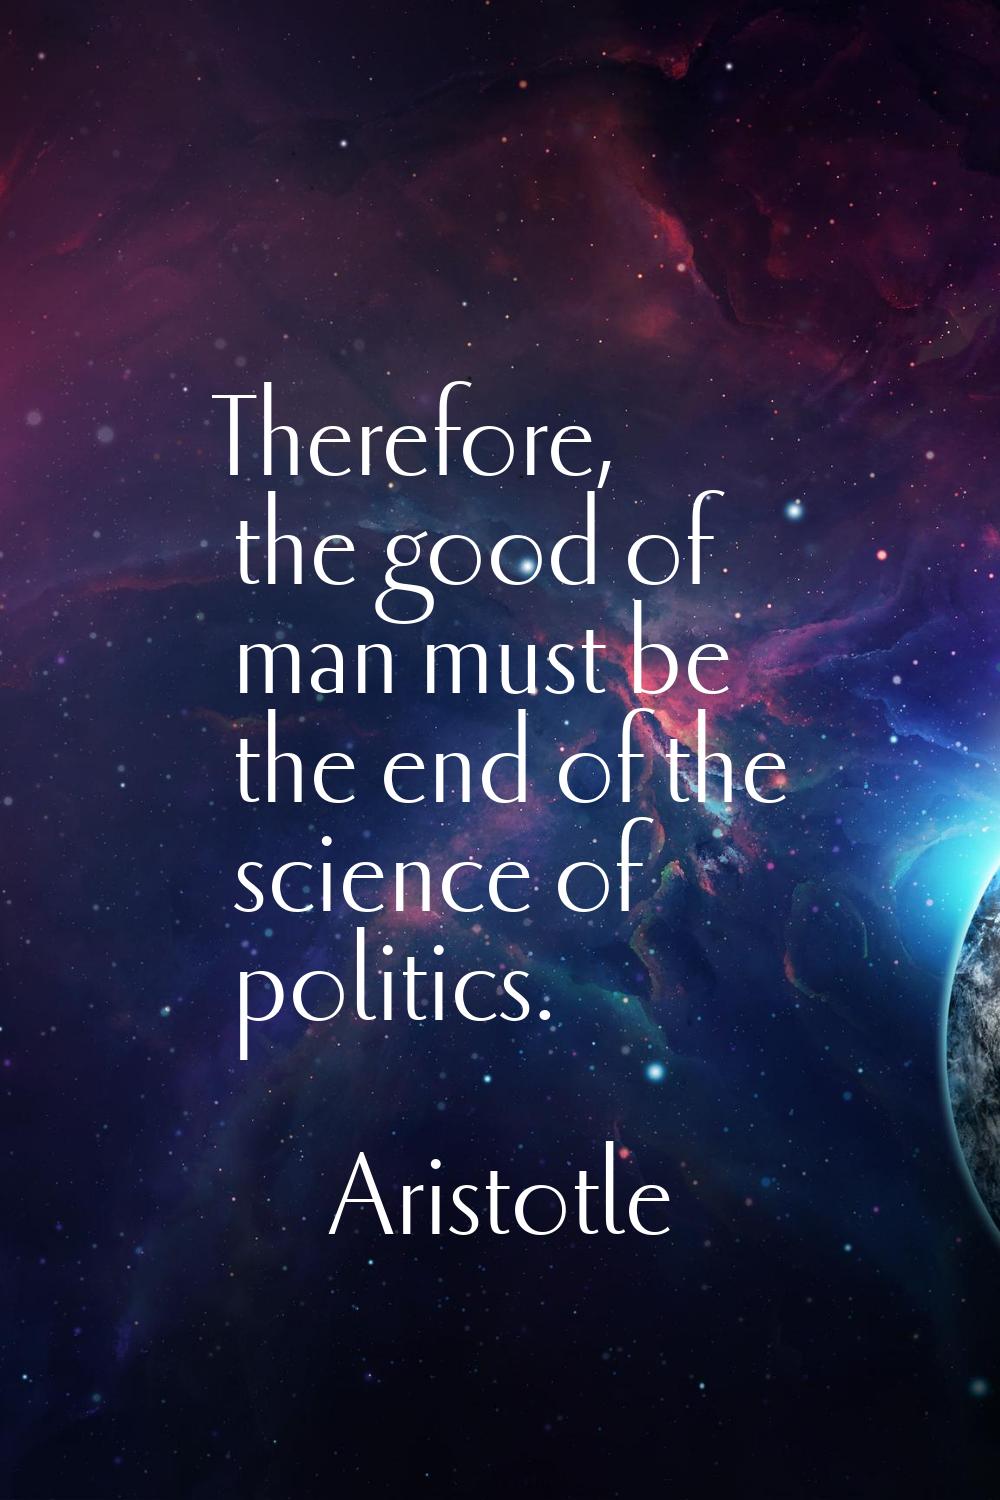 Therefore, the good of man must be the end of the science of politics.